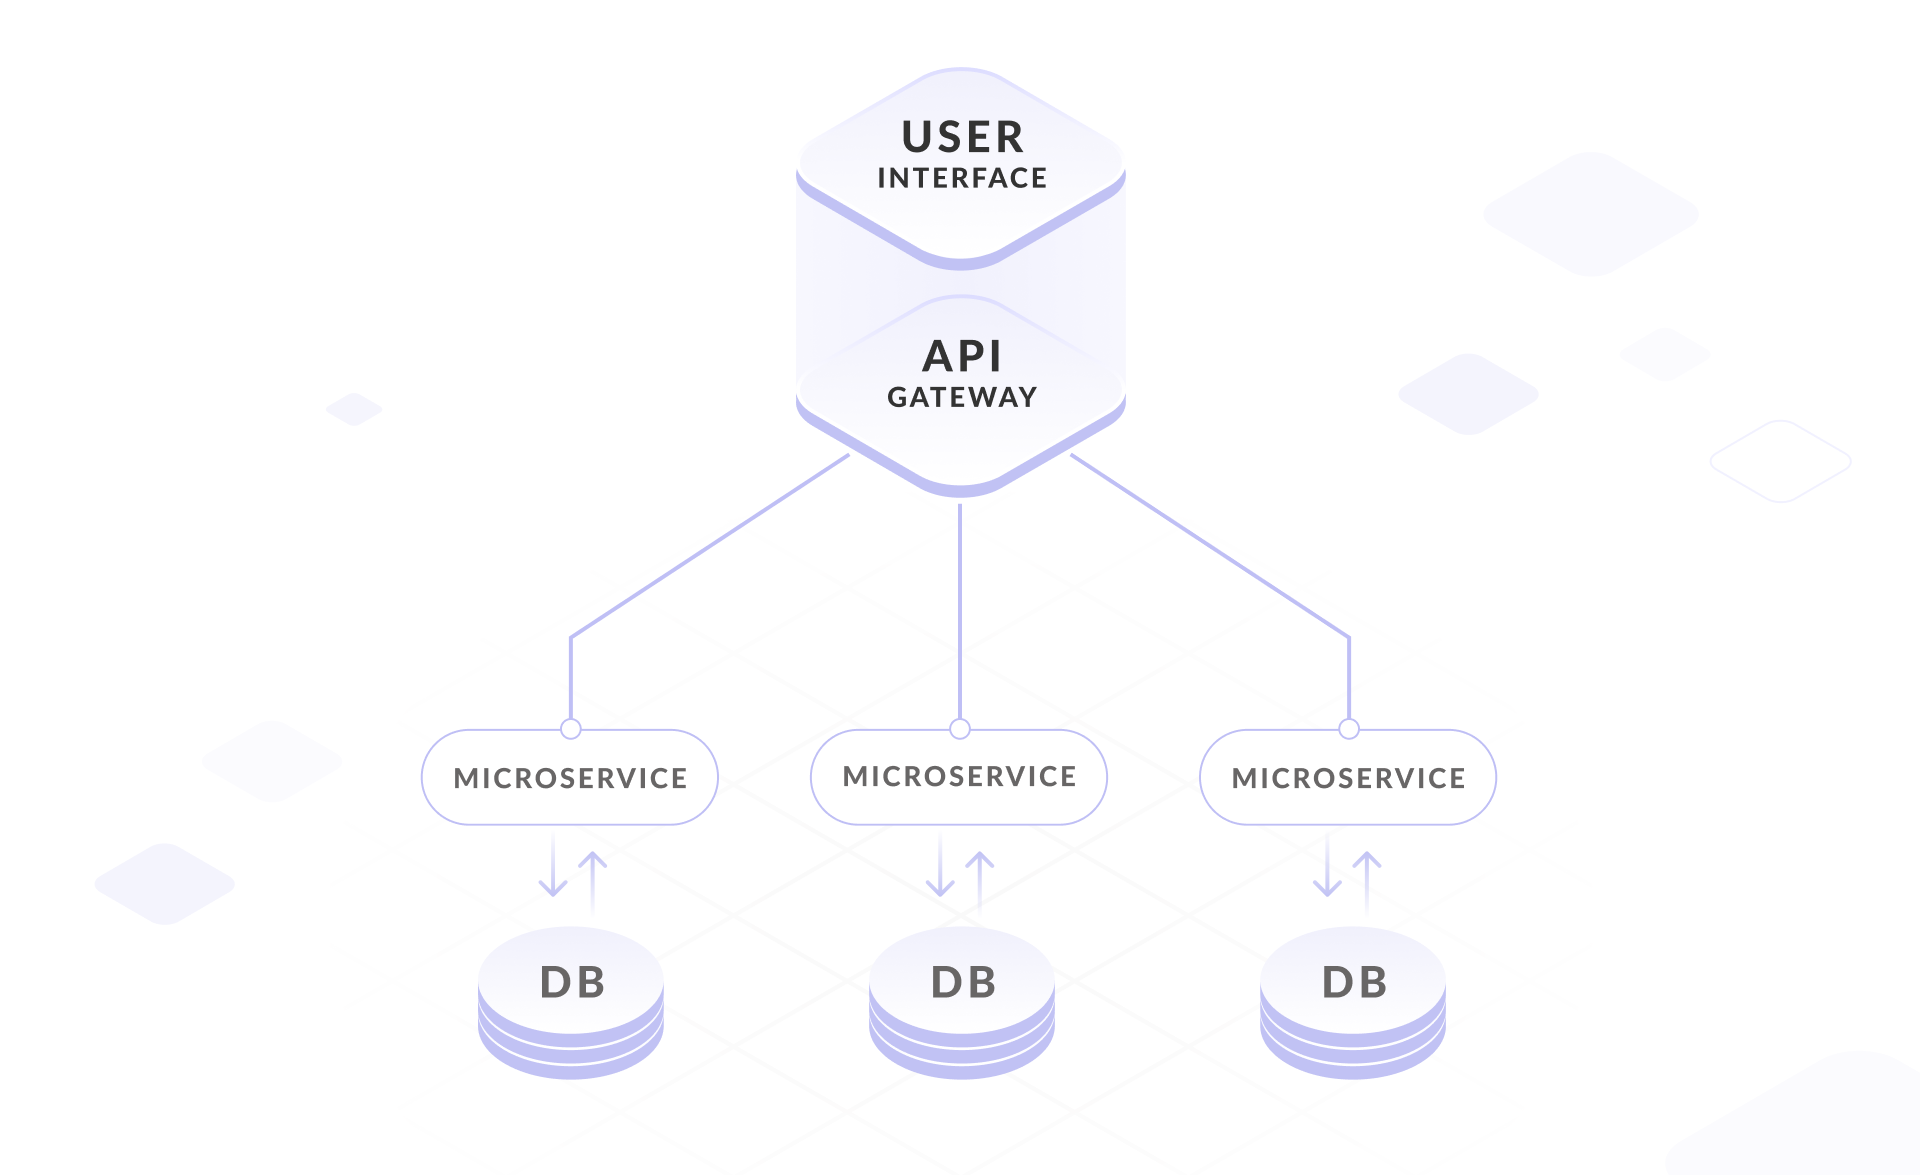 WHAT ARE MICRO FRONTENDS? HOW AND WHERE TO USE THEM?